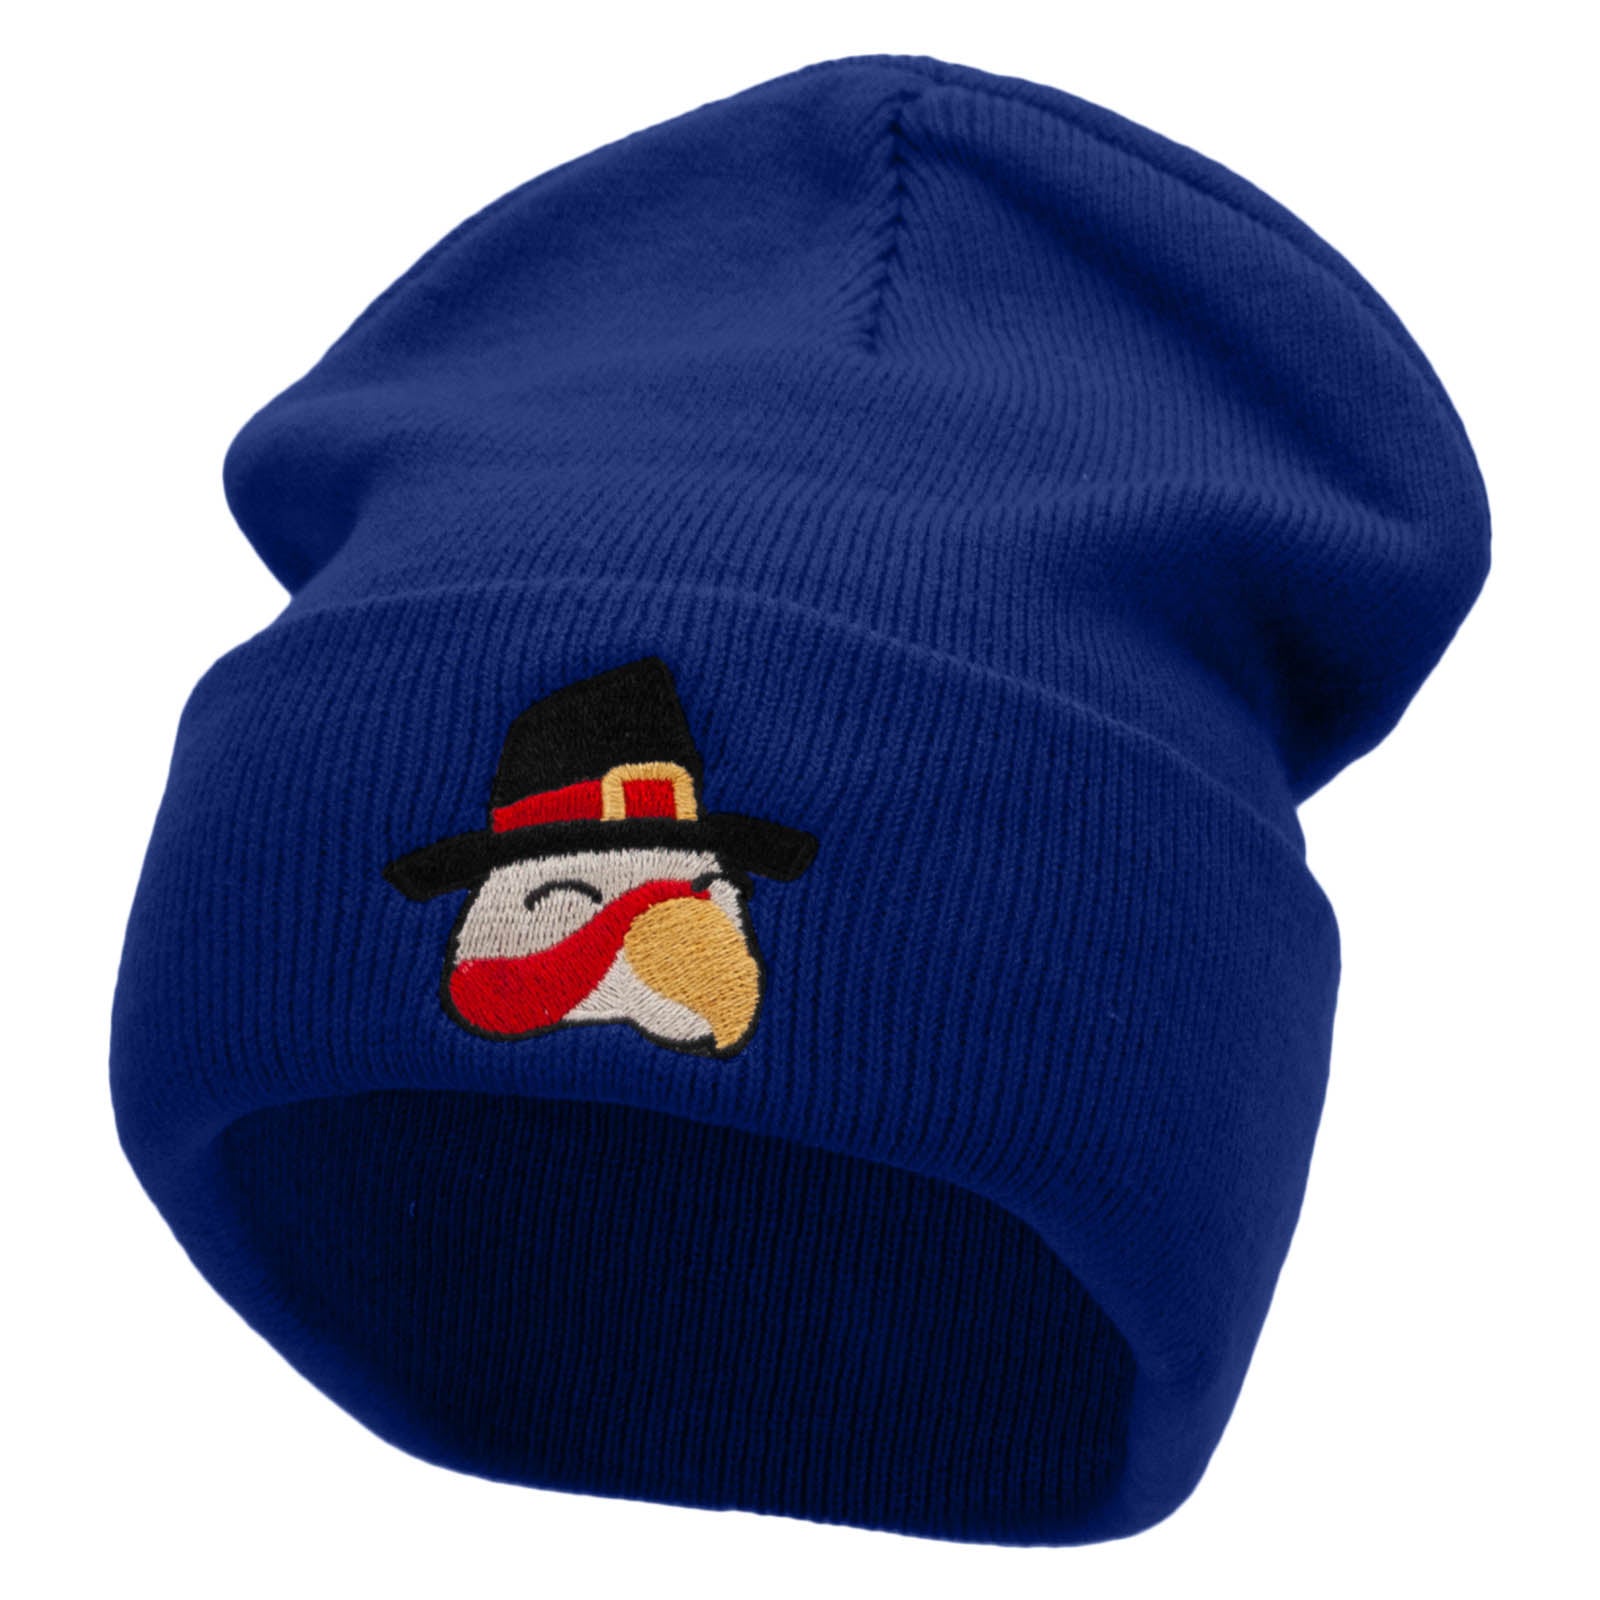 Turkey Head Embroidered 12 Inch Long Knitted Beanie - Royal OSFM